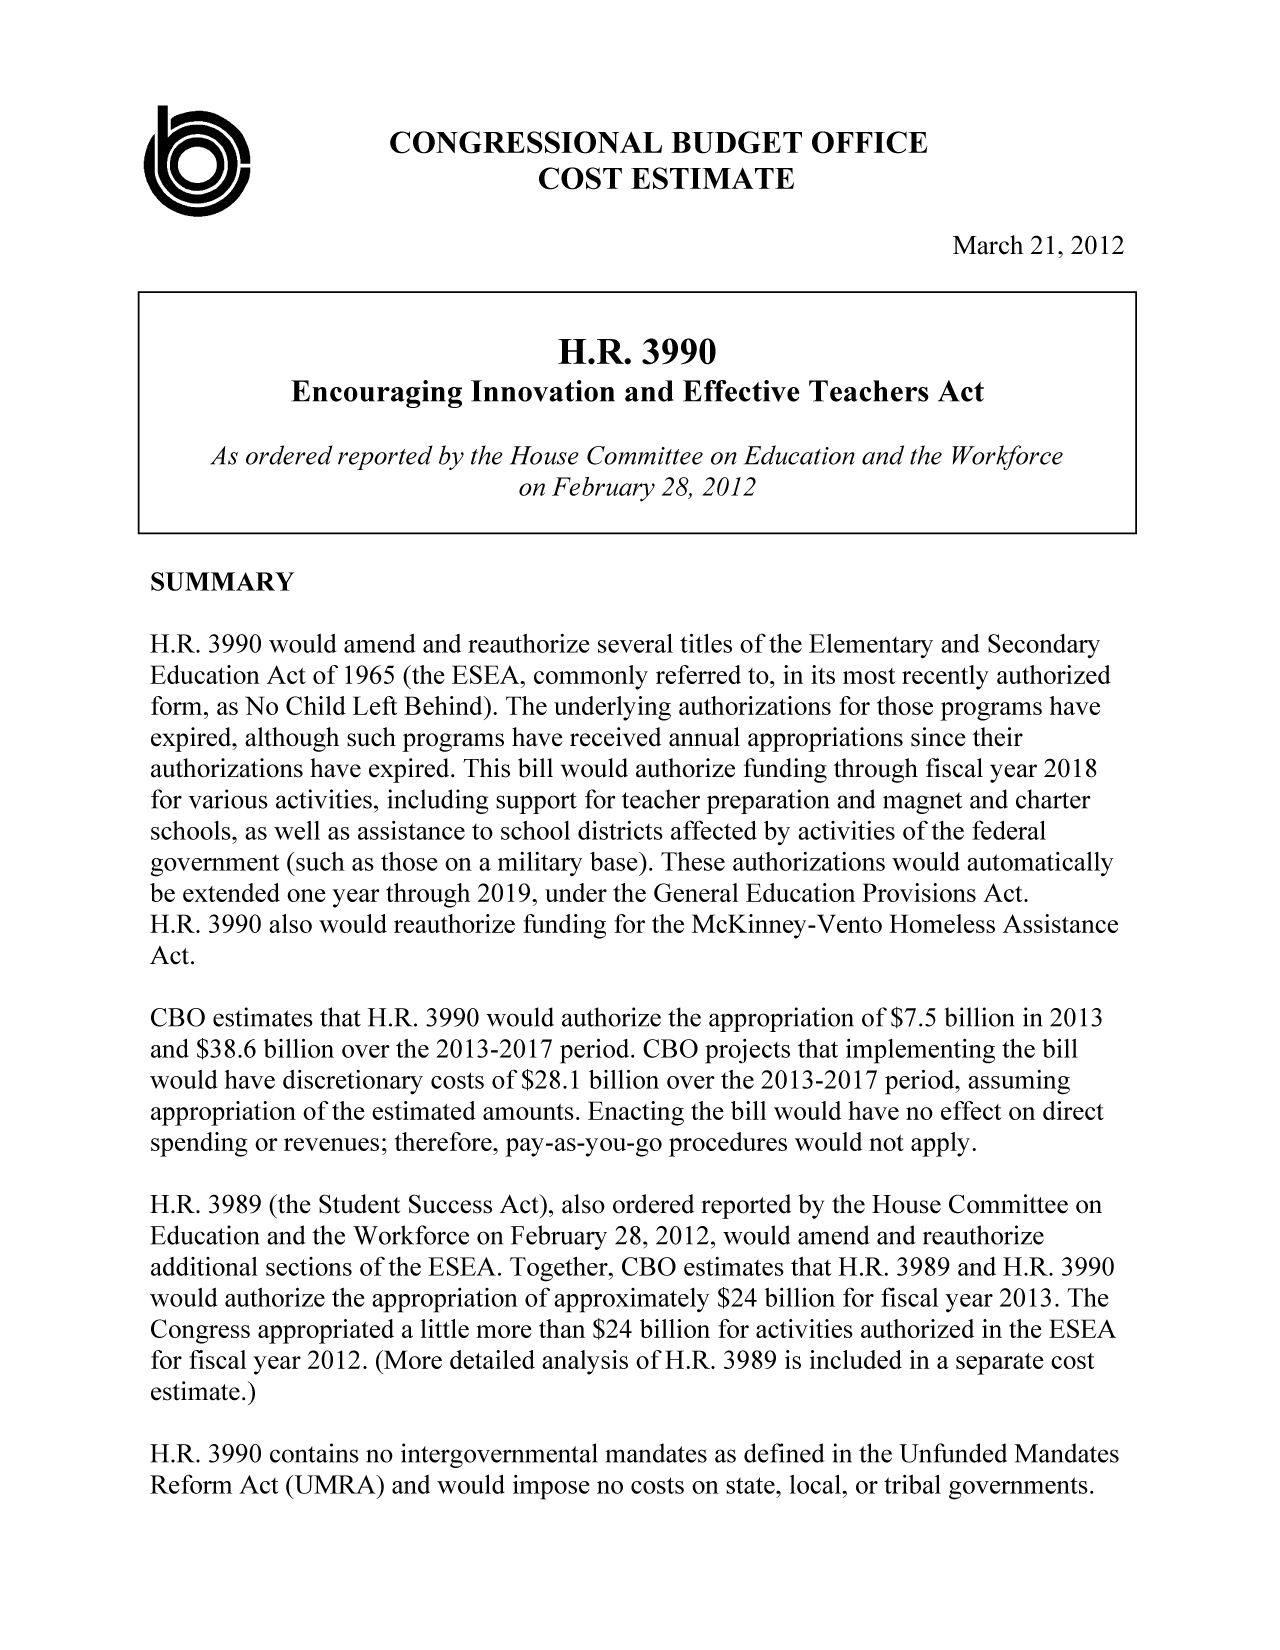 handle is hein.congrec/cbo10695 and id is 1 raw text is: CONGRESSIONAL BUDGET OFFICE
COST ESTIMATE
March 21, 2012
H.R. 3990
Encouraging Innovation and Effective Teachers Act
As ordered reported by the House Committee on Education and the Workforce
on February 28, 2012
SUMMARY
H.R. 3990 would amend and reauthorize several titles of the Elementary and Secondary
Education Act of 1965 (the ESEA, commonly referred to, in its most recently authorized
form, as No Child Left Behind). The underlying authorizations for those programs have
expired, although such programs have received annual appropriations since their
authorizations have expired. This bill would authorize funding through fiscal year 2018
for various activities, including support for teacher preparation and magnet and charter
schools, as well as assistance to school districts affected by activities of the federal
government (such as those on a military base). These authorizations would automatically
be extended one year through 2019, under the General Education Provisions Act.
H.R. 3990 also would reauthorize funding for the McKinney-Vento Homeless Assistance
Act.
CBO estimates that H.R. 3990 would authorize the appropriation of $7.5 billion in 2013
and $38.6 billion over the 2013-2017 period. CBO projects that implementing the bill
would have discretionary costs of $28.1 billion over the 2013-2017 period, assuming
appropriation of the estimated amounts. Enacting the bill would have no effect on direct
spending or revenues; therefore, pay-as-you-go procedures would not apply.
H.R. 3989 (the Student Success Act), also ordered reported by the House Committee on
Education and the Workforce on February 28, 2012, would amend and reauthorize
additional sections of the ESEA. Together, CBO estimates that H.R. 3989 and H.R. 3990
would authorize the appropriation of approximately $24 billion for fiscal year 2013. The
Congress appropriated a little more than $24 billion for activities authorized in the ESEA
for fiscal year 2012. (More detailed analysis of H.R. 3989 is included in a separate cost
estimate.)
H.R. 3990 contains no intergovernmental mandates as defined in the Unfunded Mandates
Reform Act (UMRA) and would impose no costs on state, local, or tribal governments.


